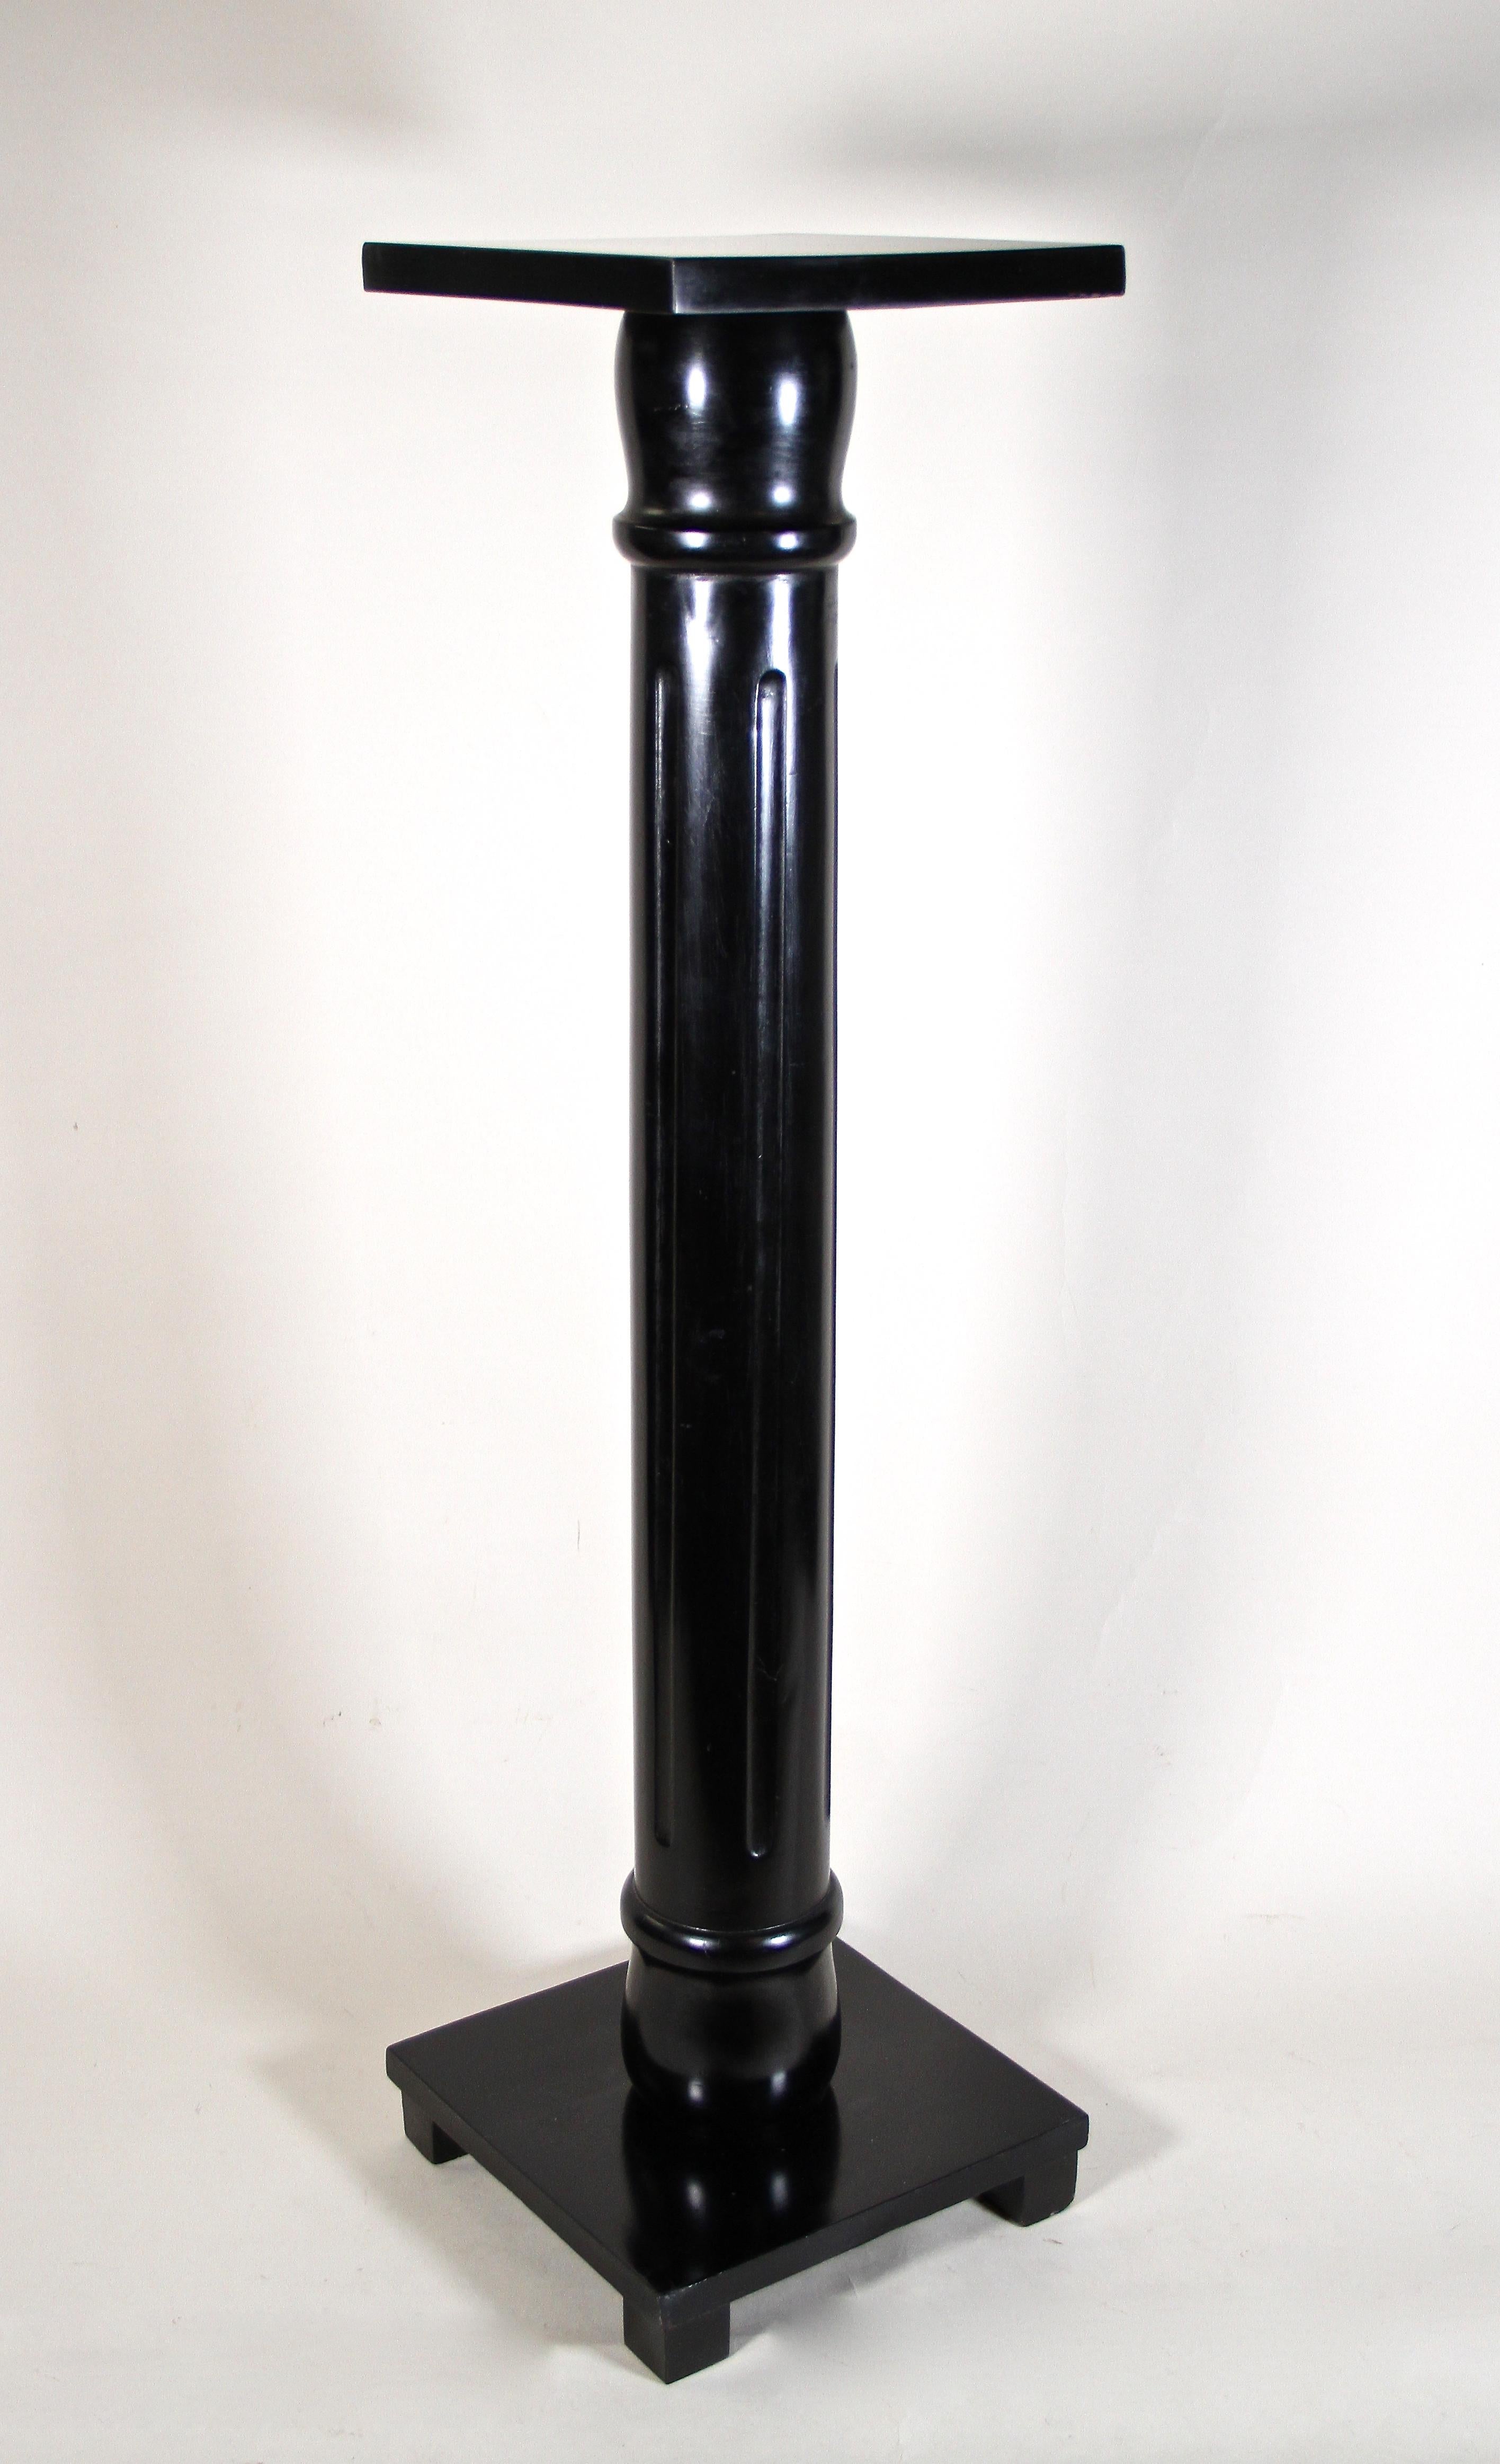 Beautiful Ebonized Art Nouveau Column pedestal from Austria around 1900. Hand carved out of solid beech wood, this lovely straight shaped pedestal comes with a fantastic ebonized, black shellac polished surface. Standing solid on a simple but great